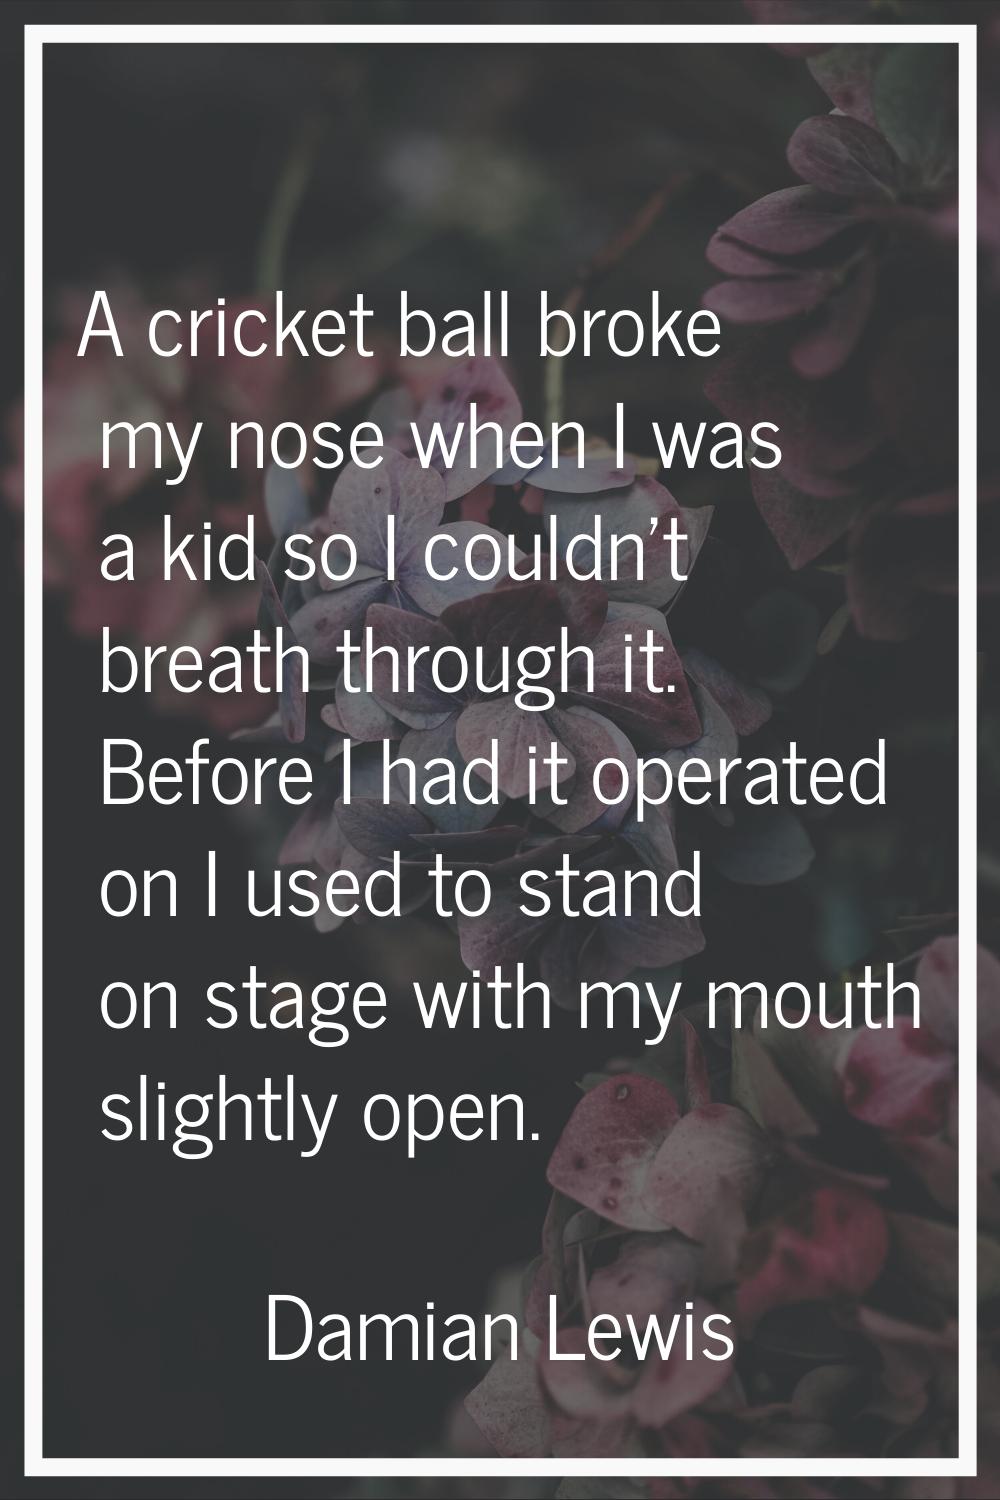 A cricket ball broke my nose when I was a kid so I couldn't breath through it. Before I had it oper